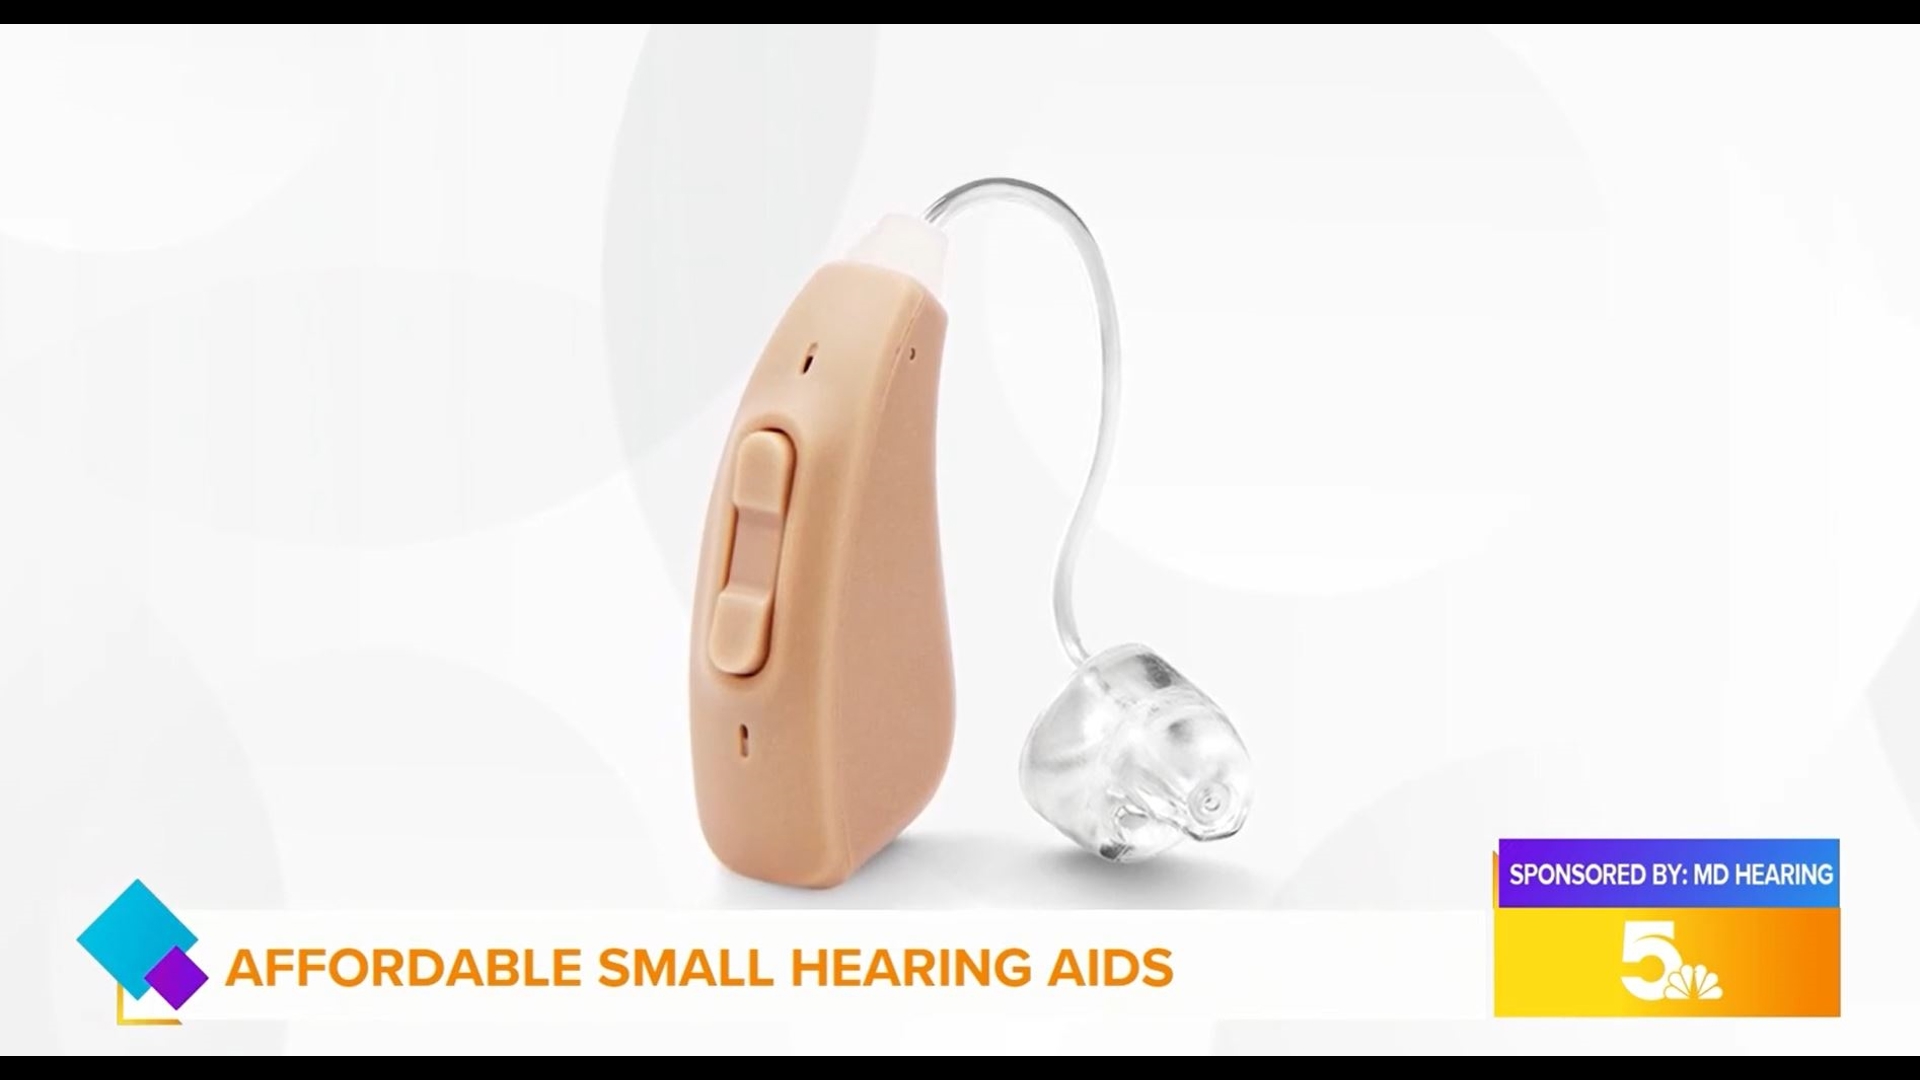 Our sister station in Cleveland shares how affordable and effective small hearing aids can be.